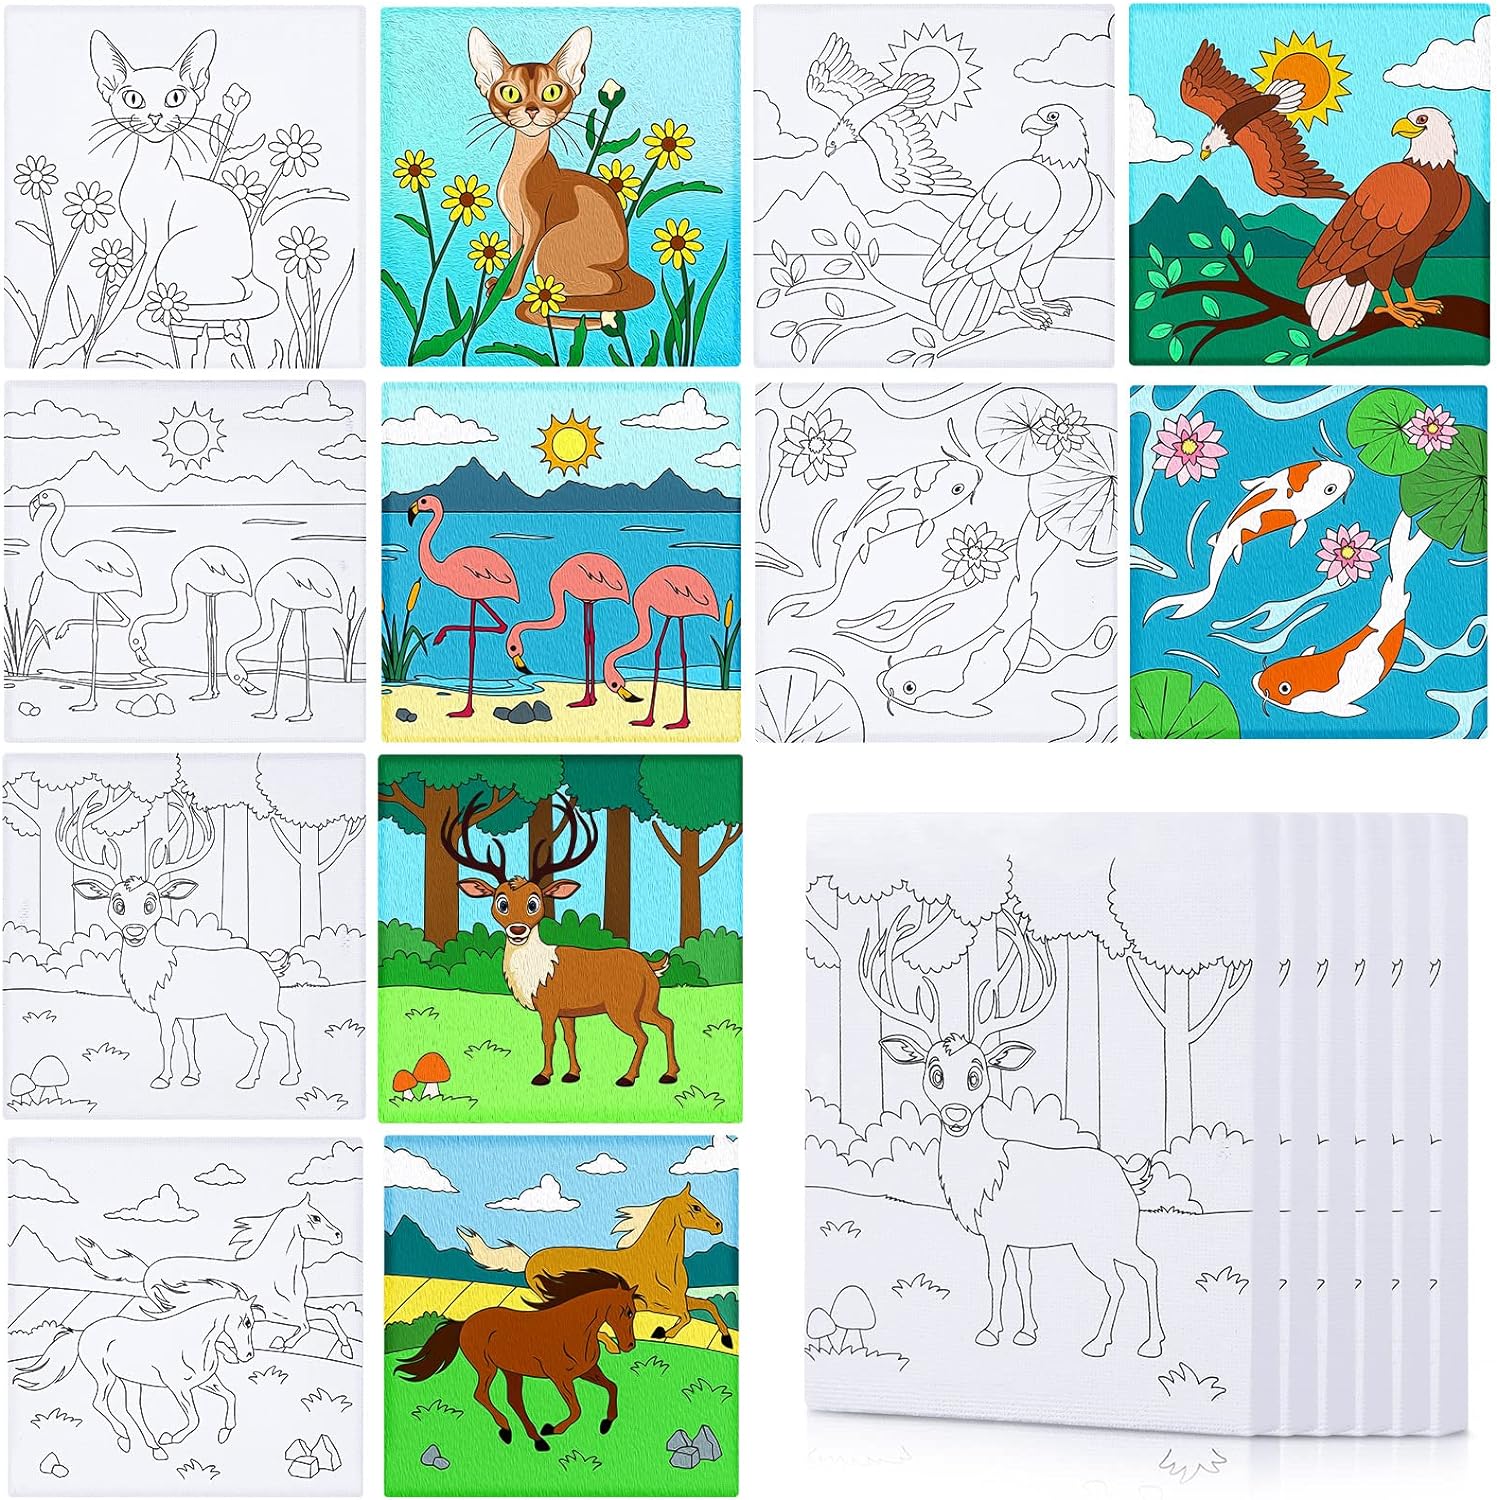 12 Pcs Pre Drawn Outline Canvas Art 4 x 4 inch, Back to School Pre Drawn Stretched Canvas Painting Boards for Painting First & Last Day of School Paint Party Favor for Kid Student (Cute Style)